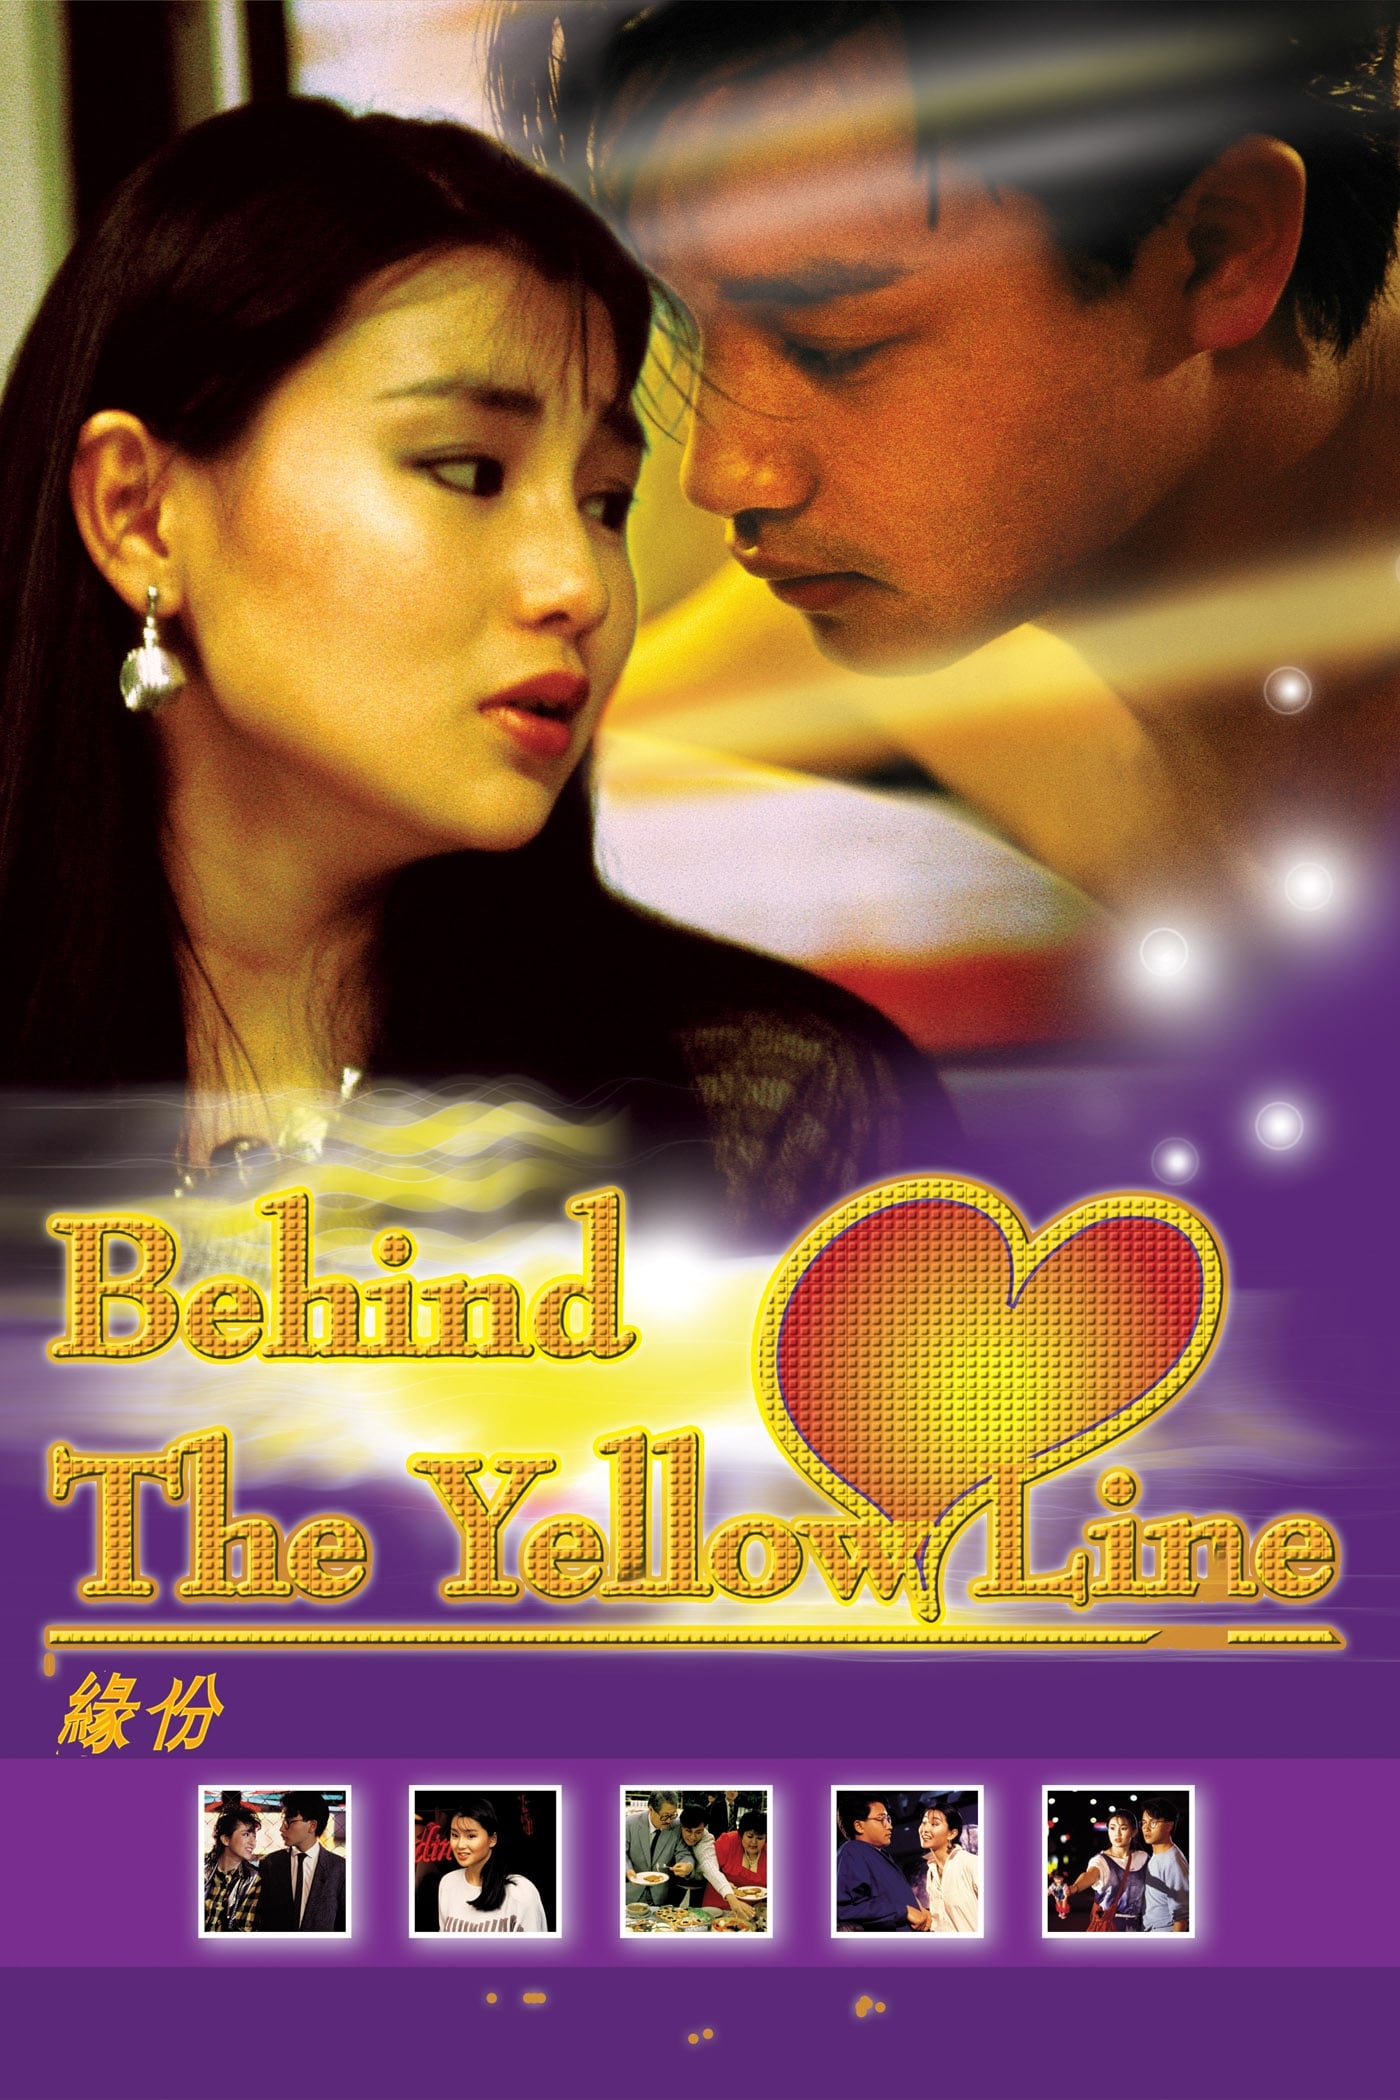 Behind the Yellow Line (1984)